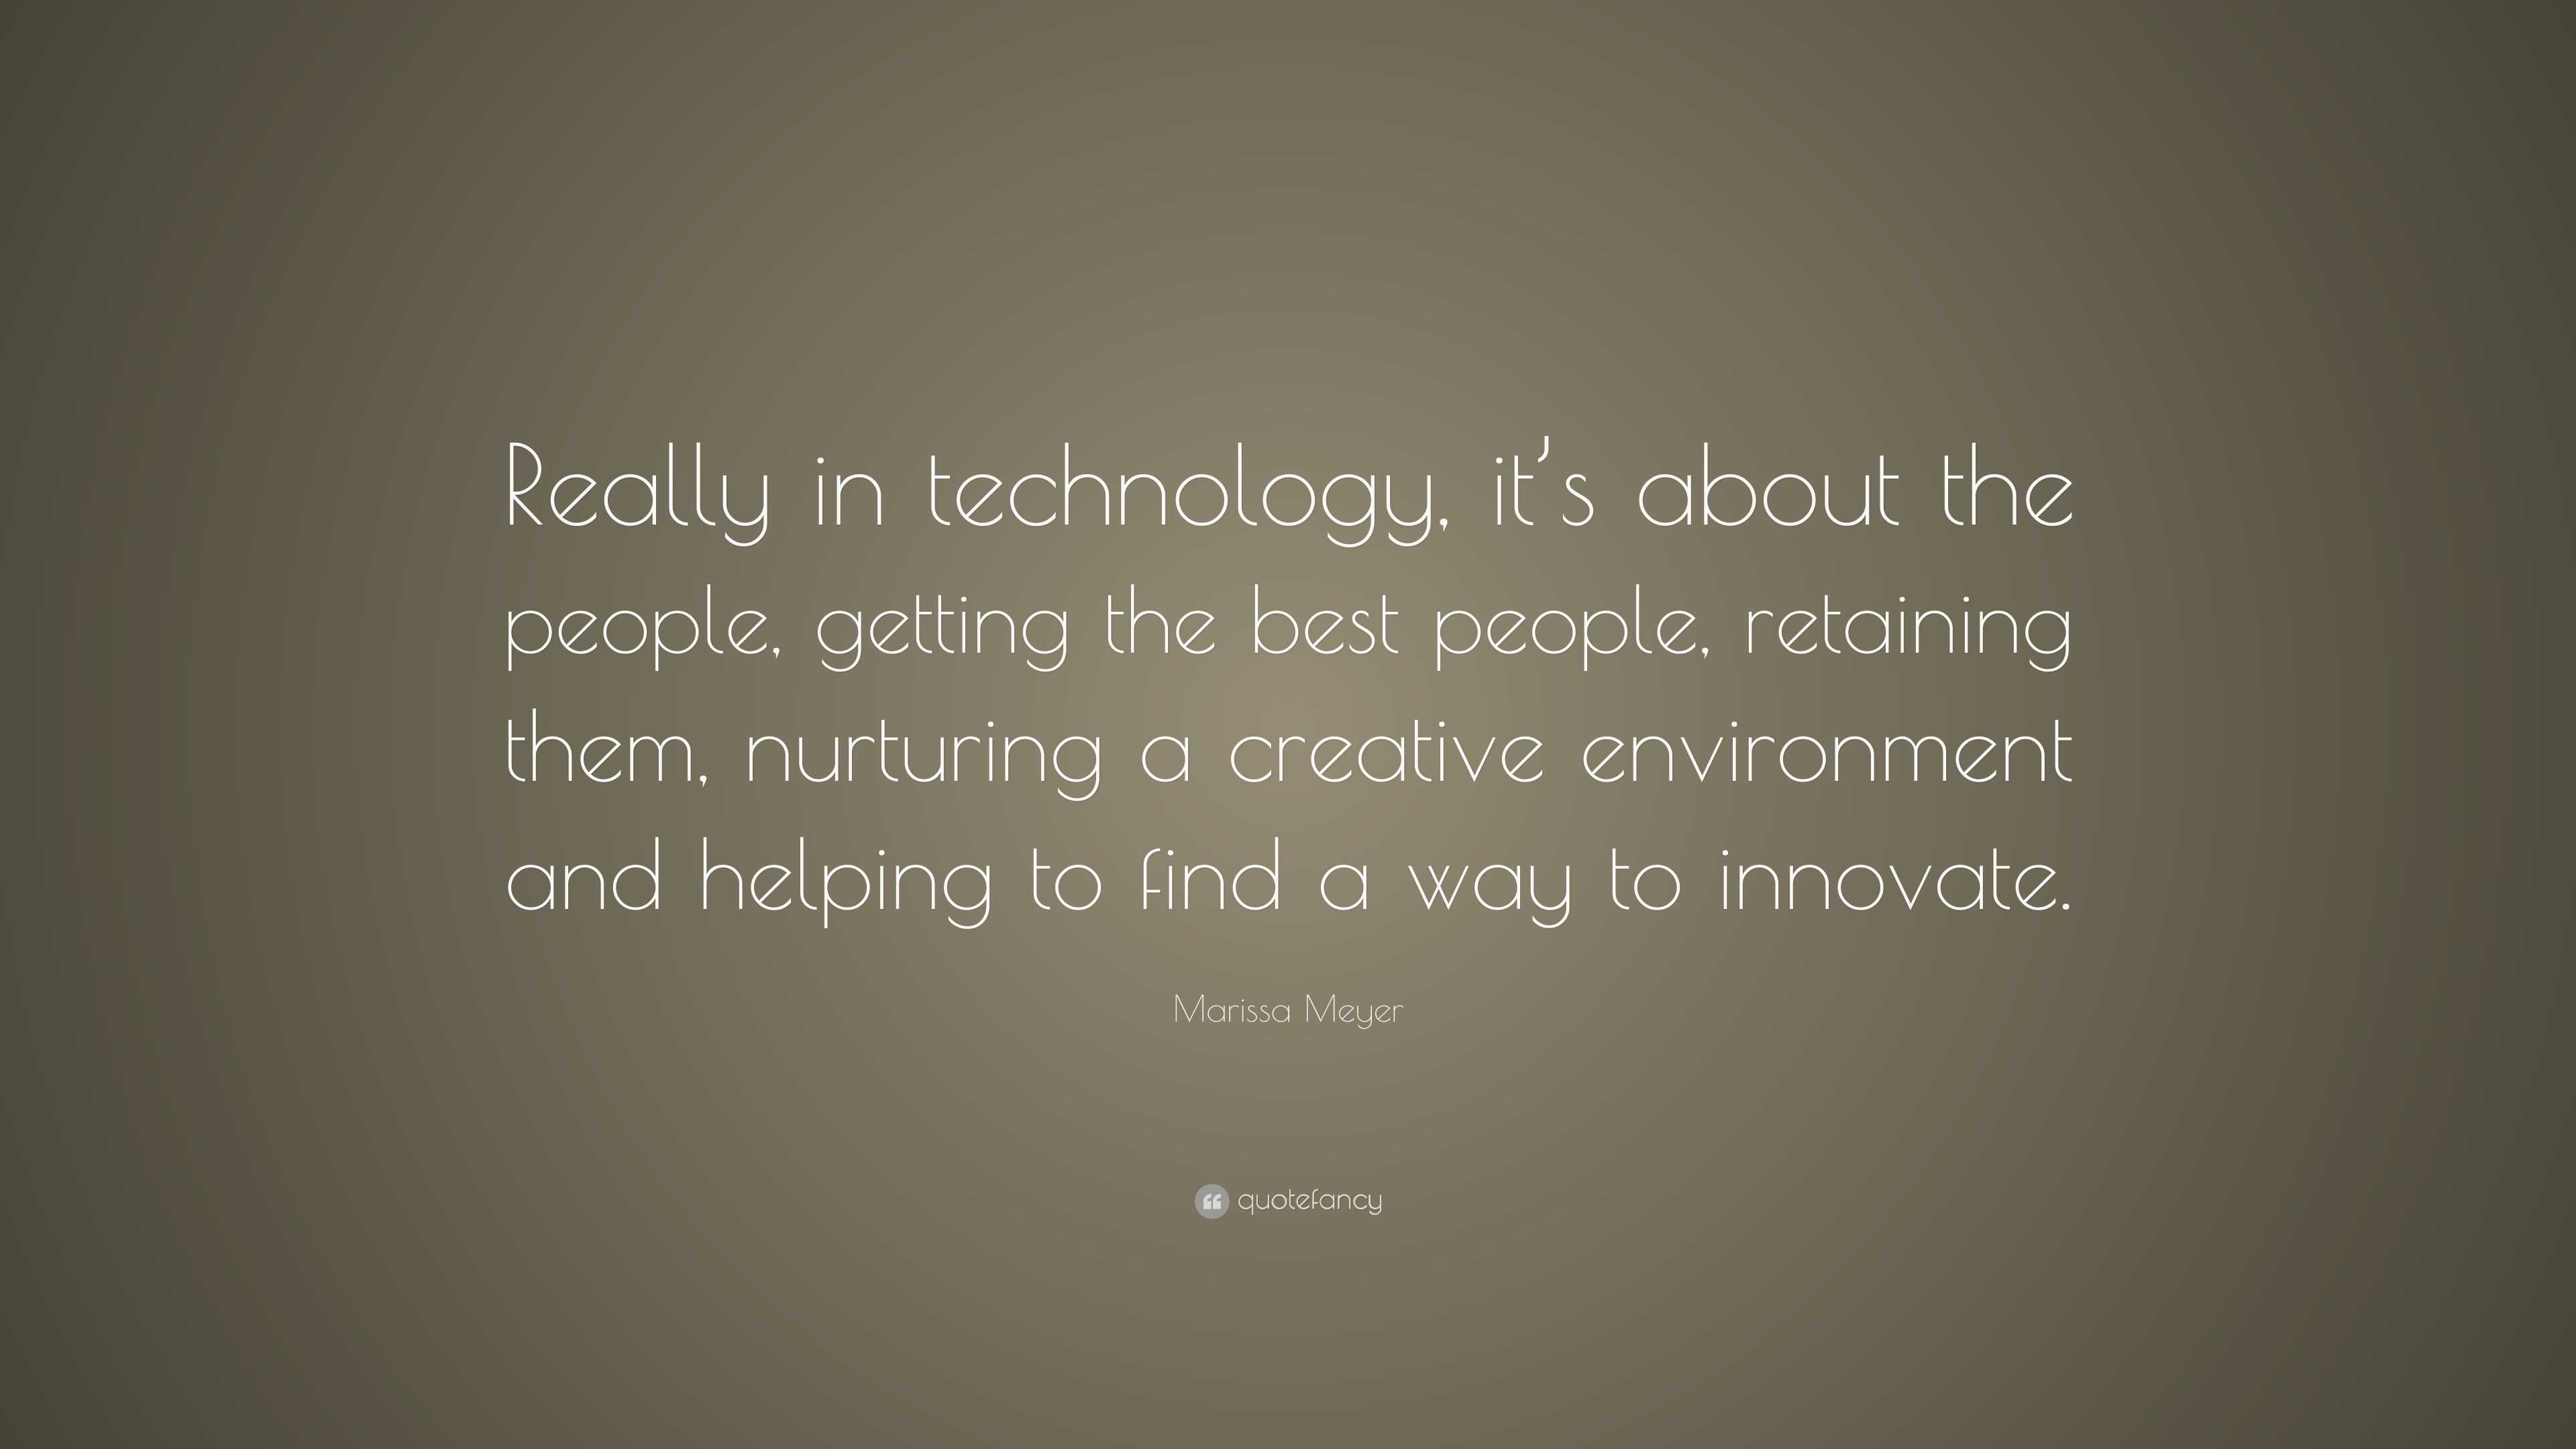 Marissa Meyer Quote: “Really in technology, it’s about the people ...